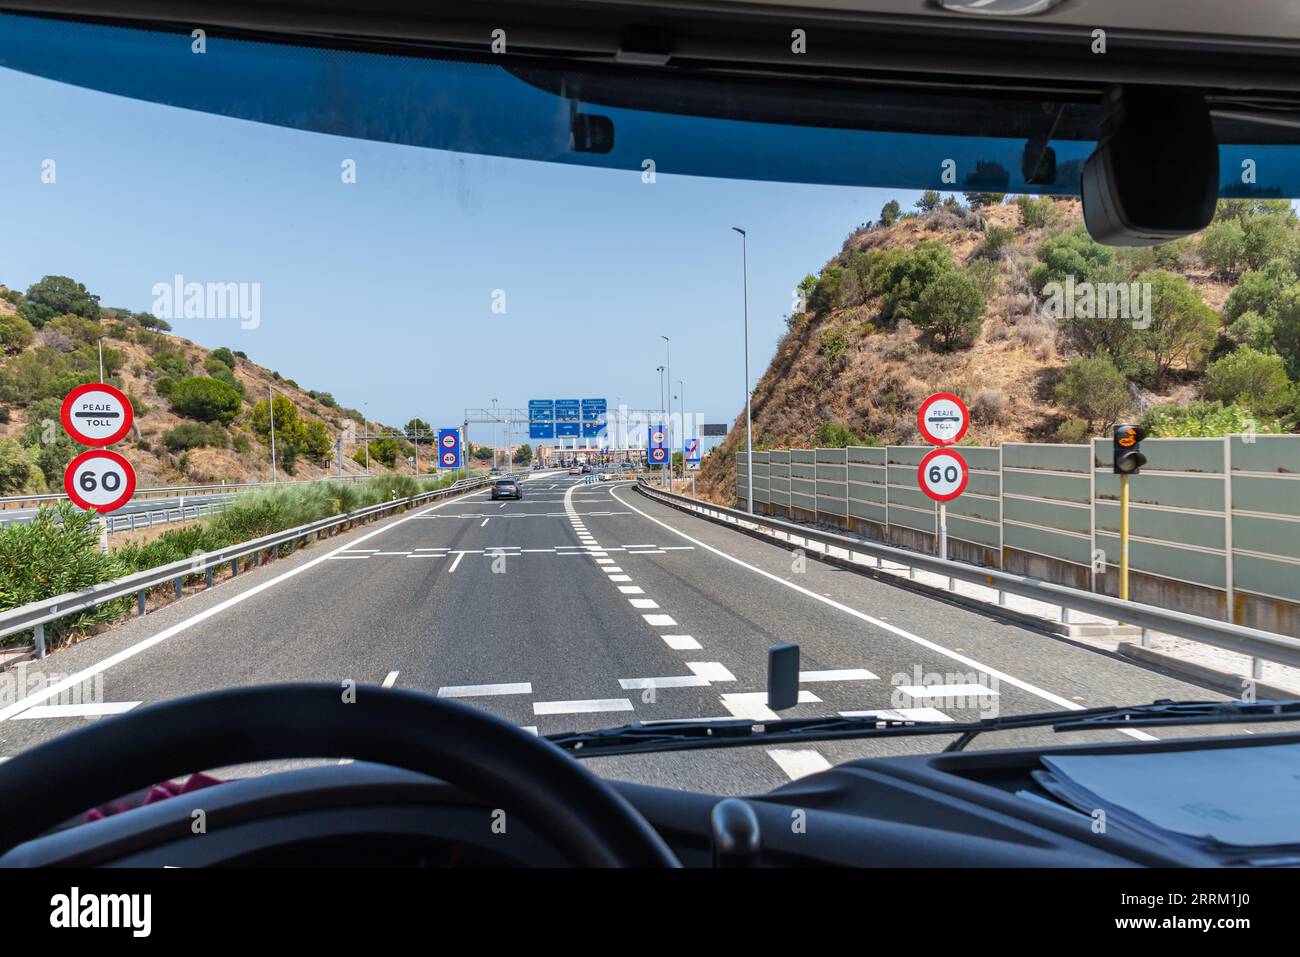 View from the driving position of a truck of the information signs upon arrival at a tollbooth. Stock Photo